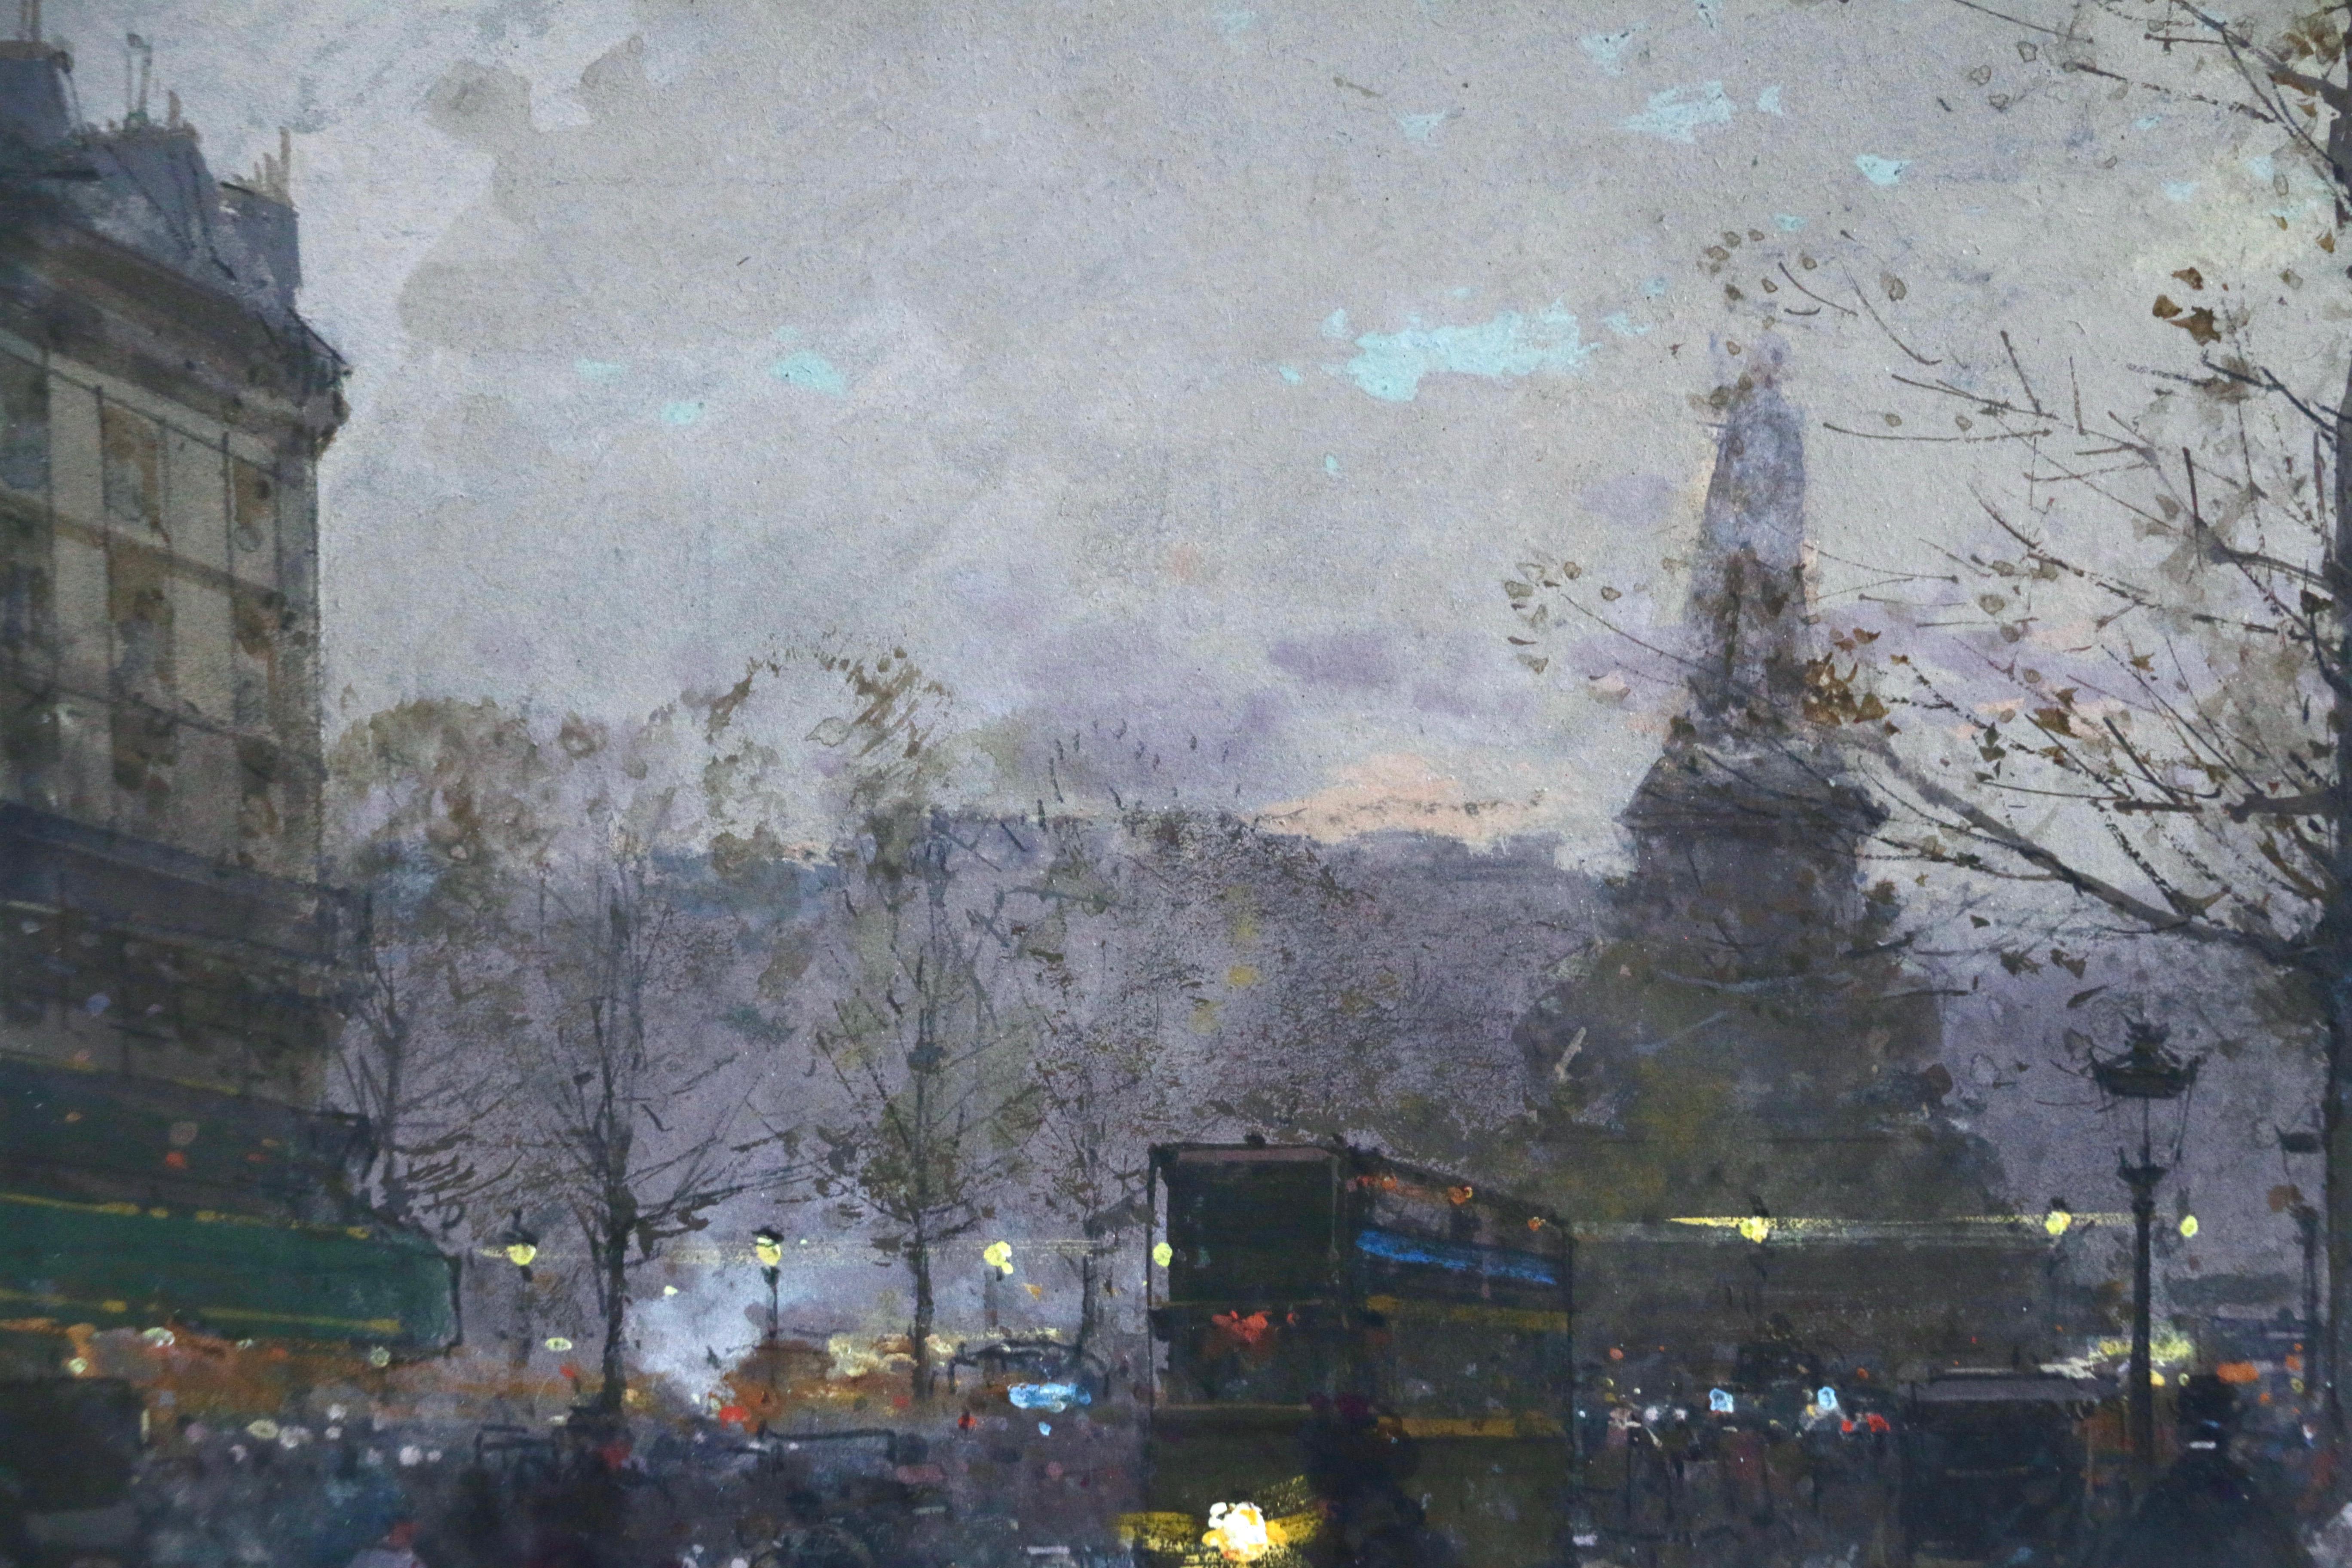 An outstanding and good sized picture of a famous square in Paris, by Eugene Galien-Laloue. Gouache on paper, circa 1910. Signed lower left. Framed dimensions are 10.5 inches high by 16 inches wide.

The Place de la Bastille is a square in Paris